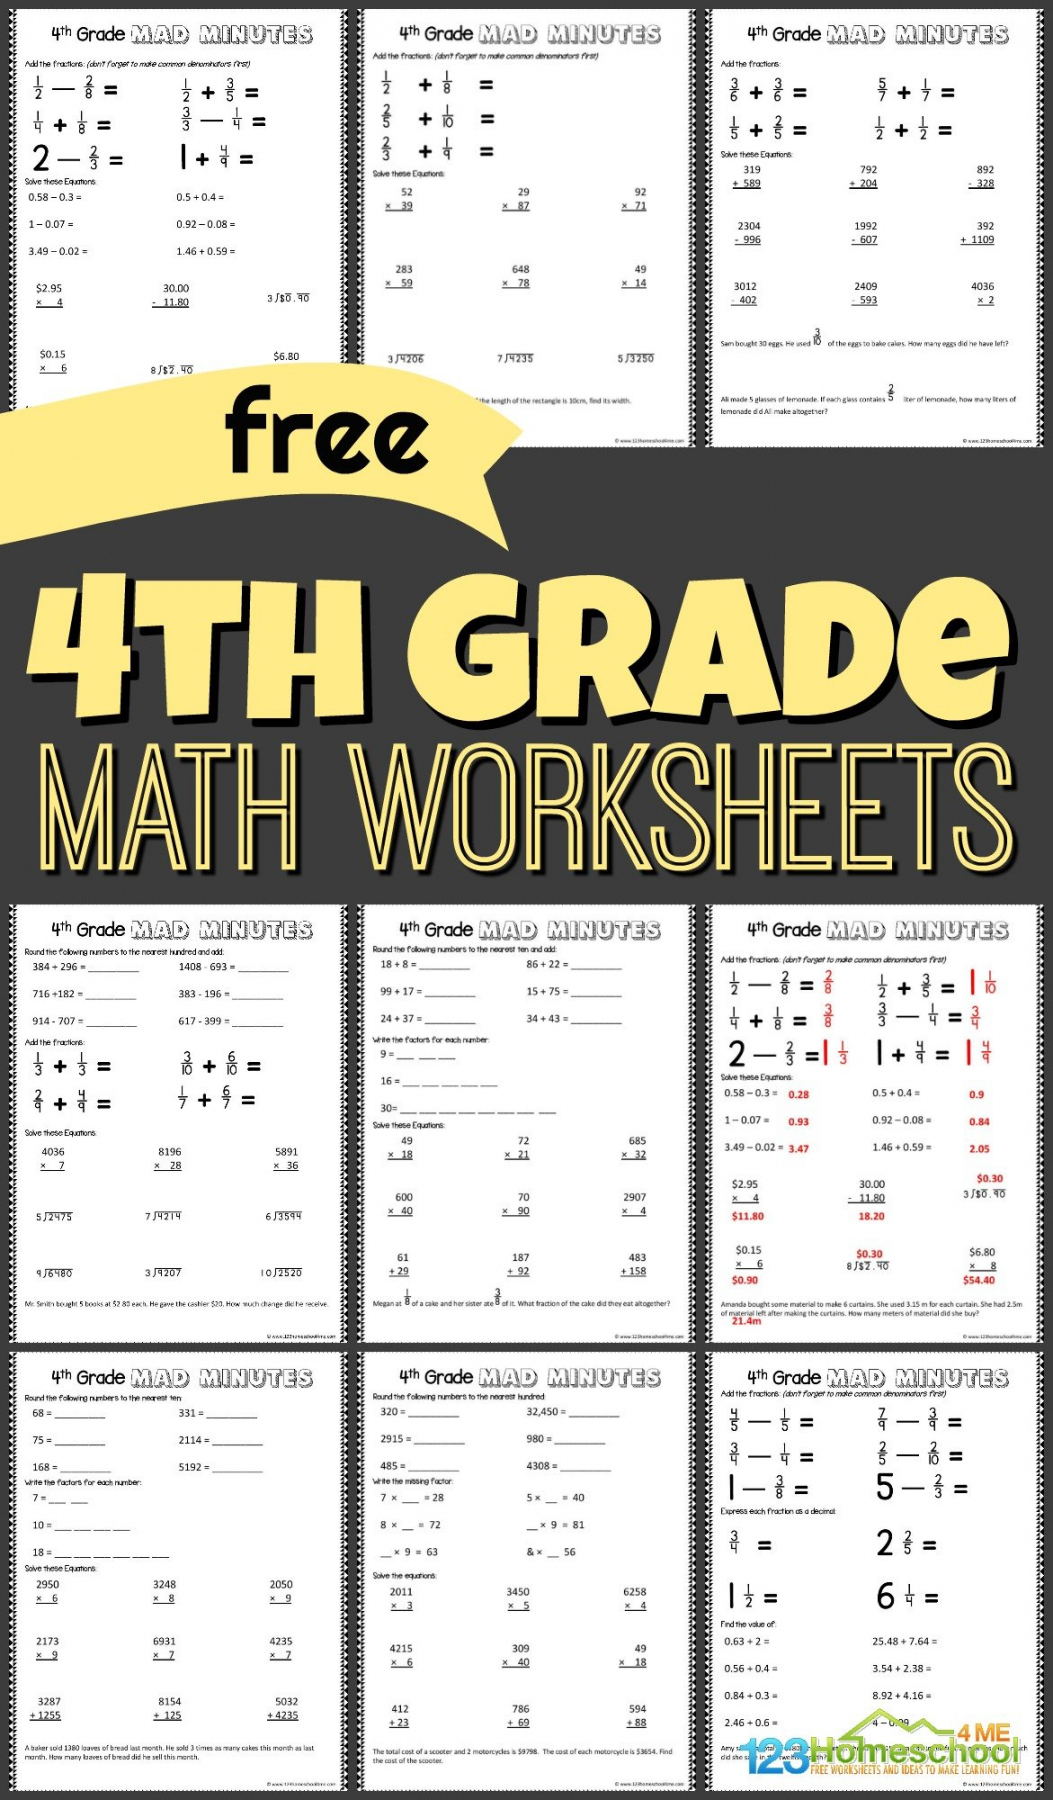 Free Printable Worksheets For 4th Graders - Printable - ✏️ FREE Printable th Grade Math Worksheets pdf